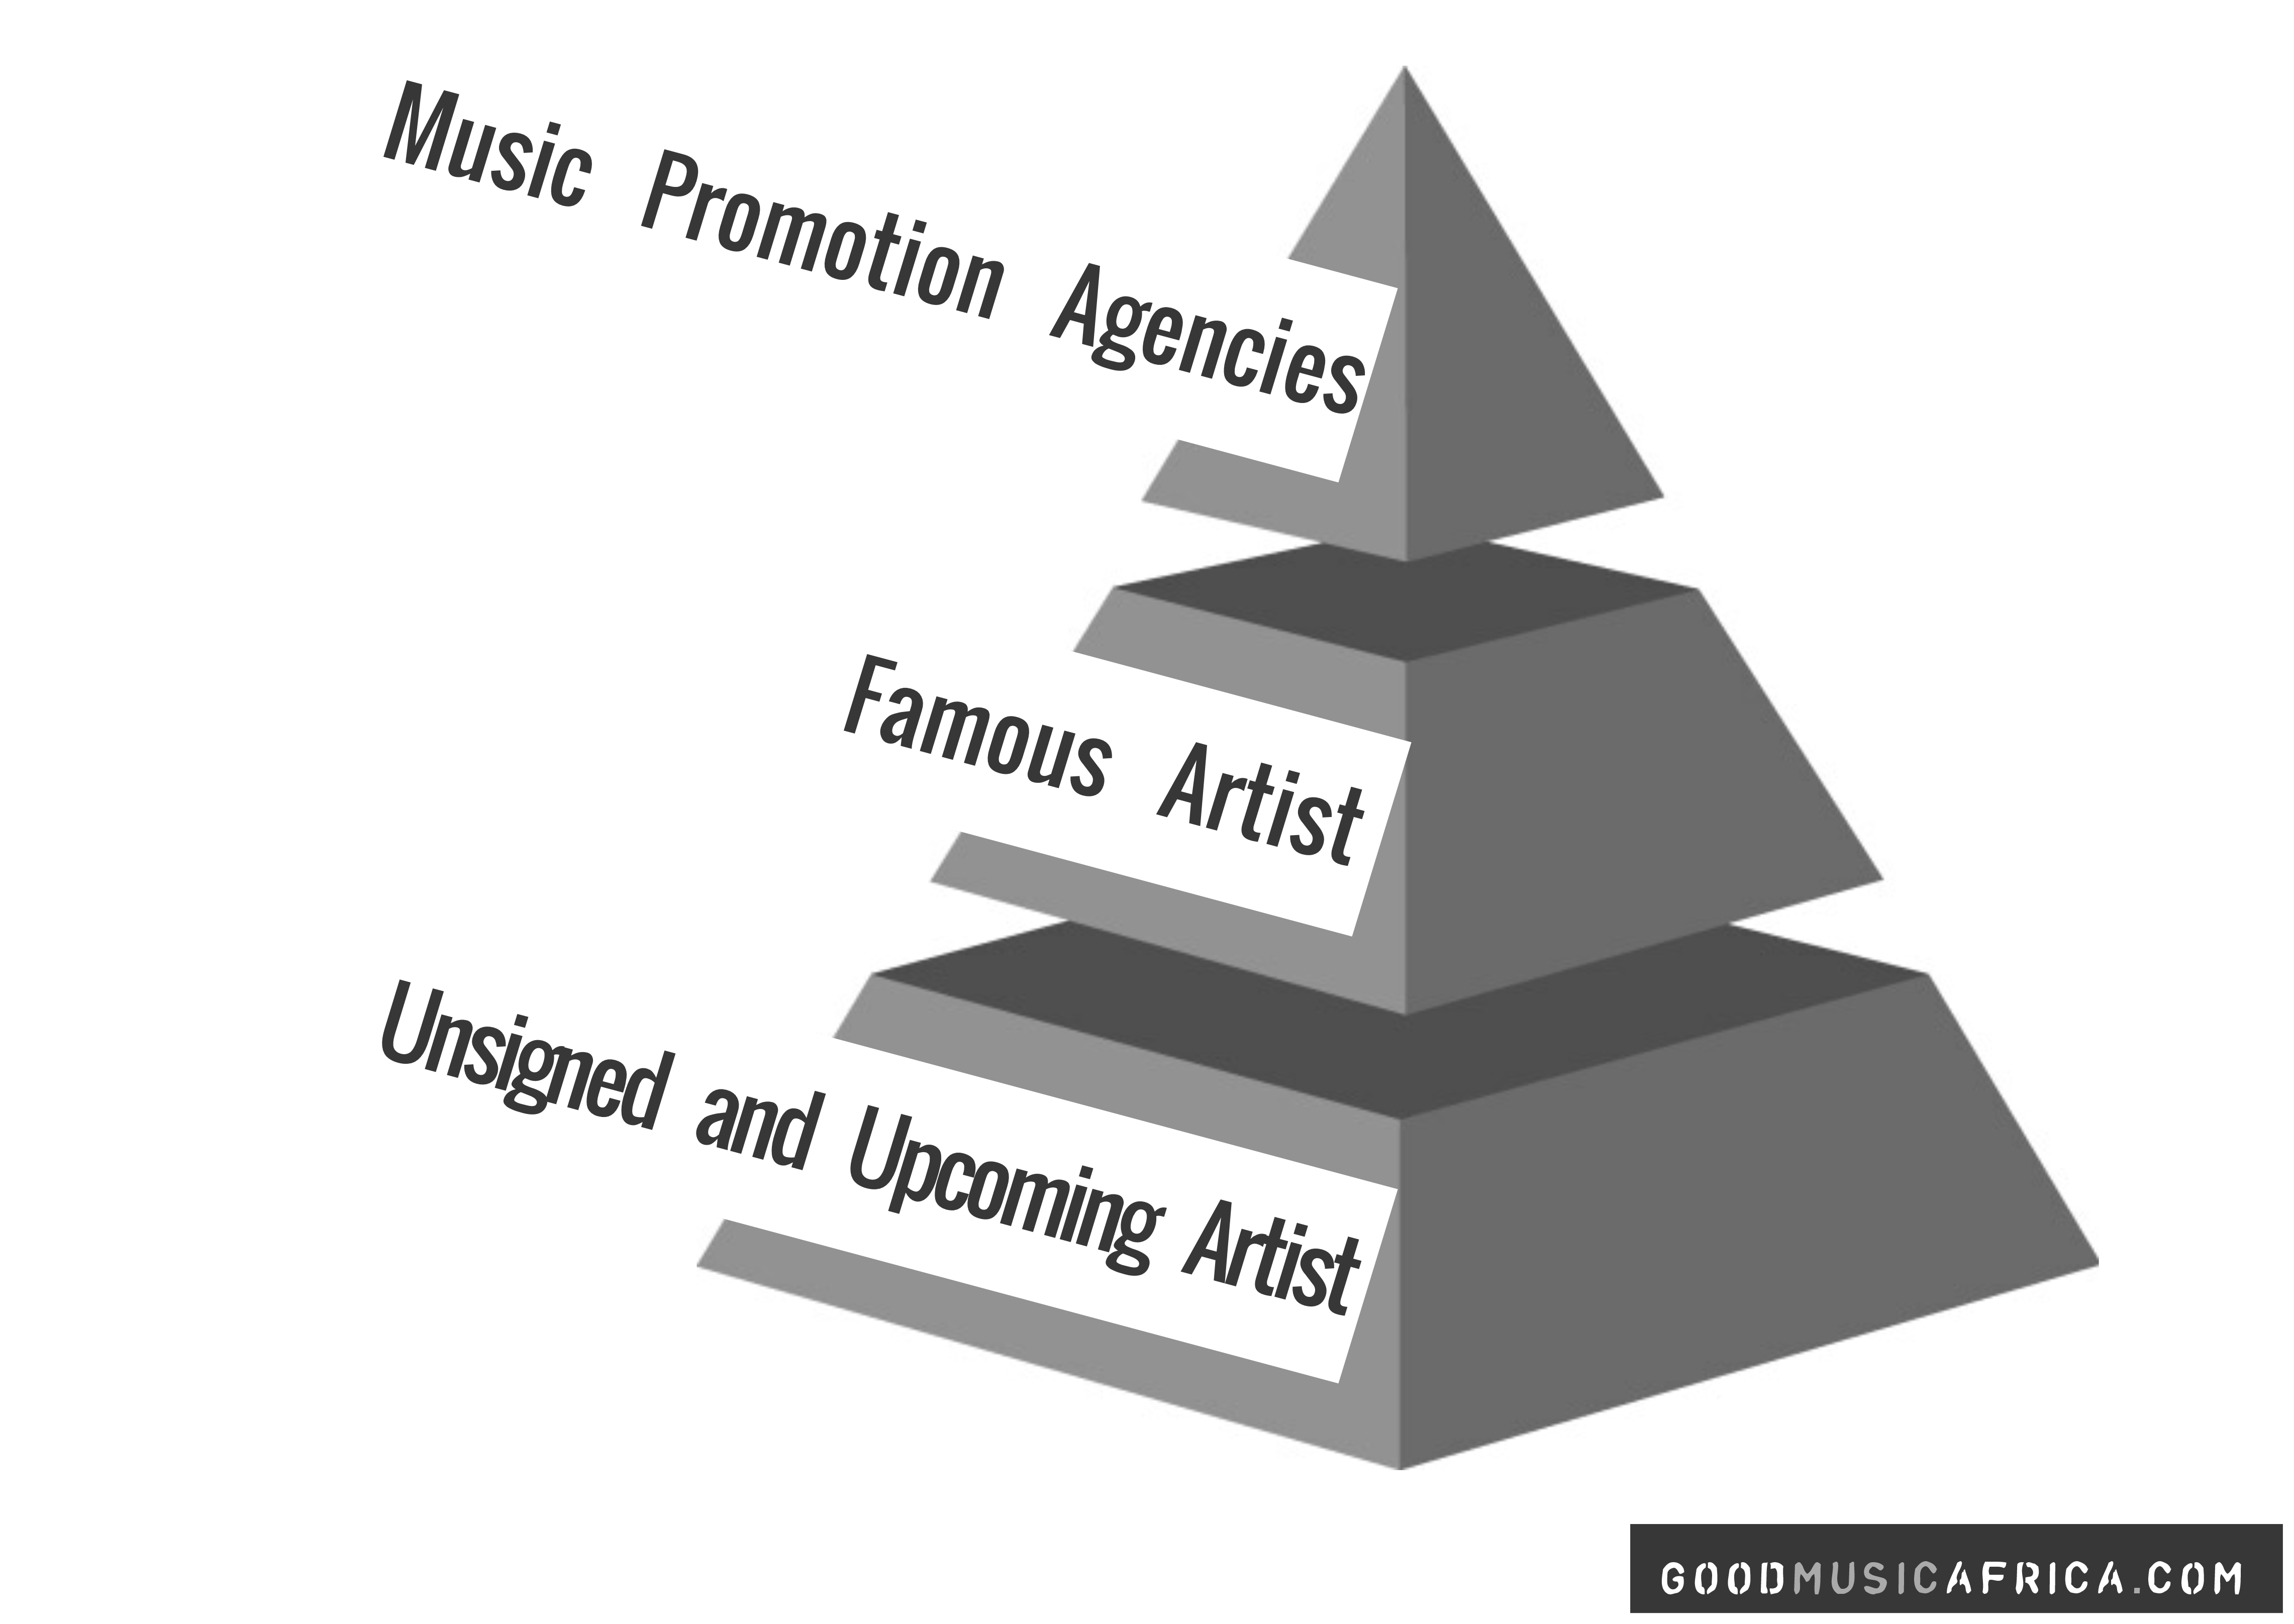 Music Promotion Tips and Advice - Pyramid of Influence in the music industry 